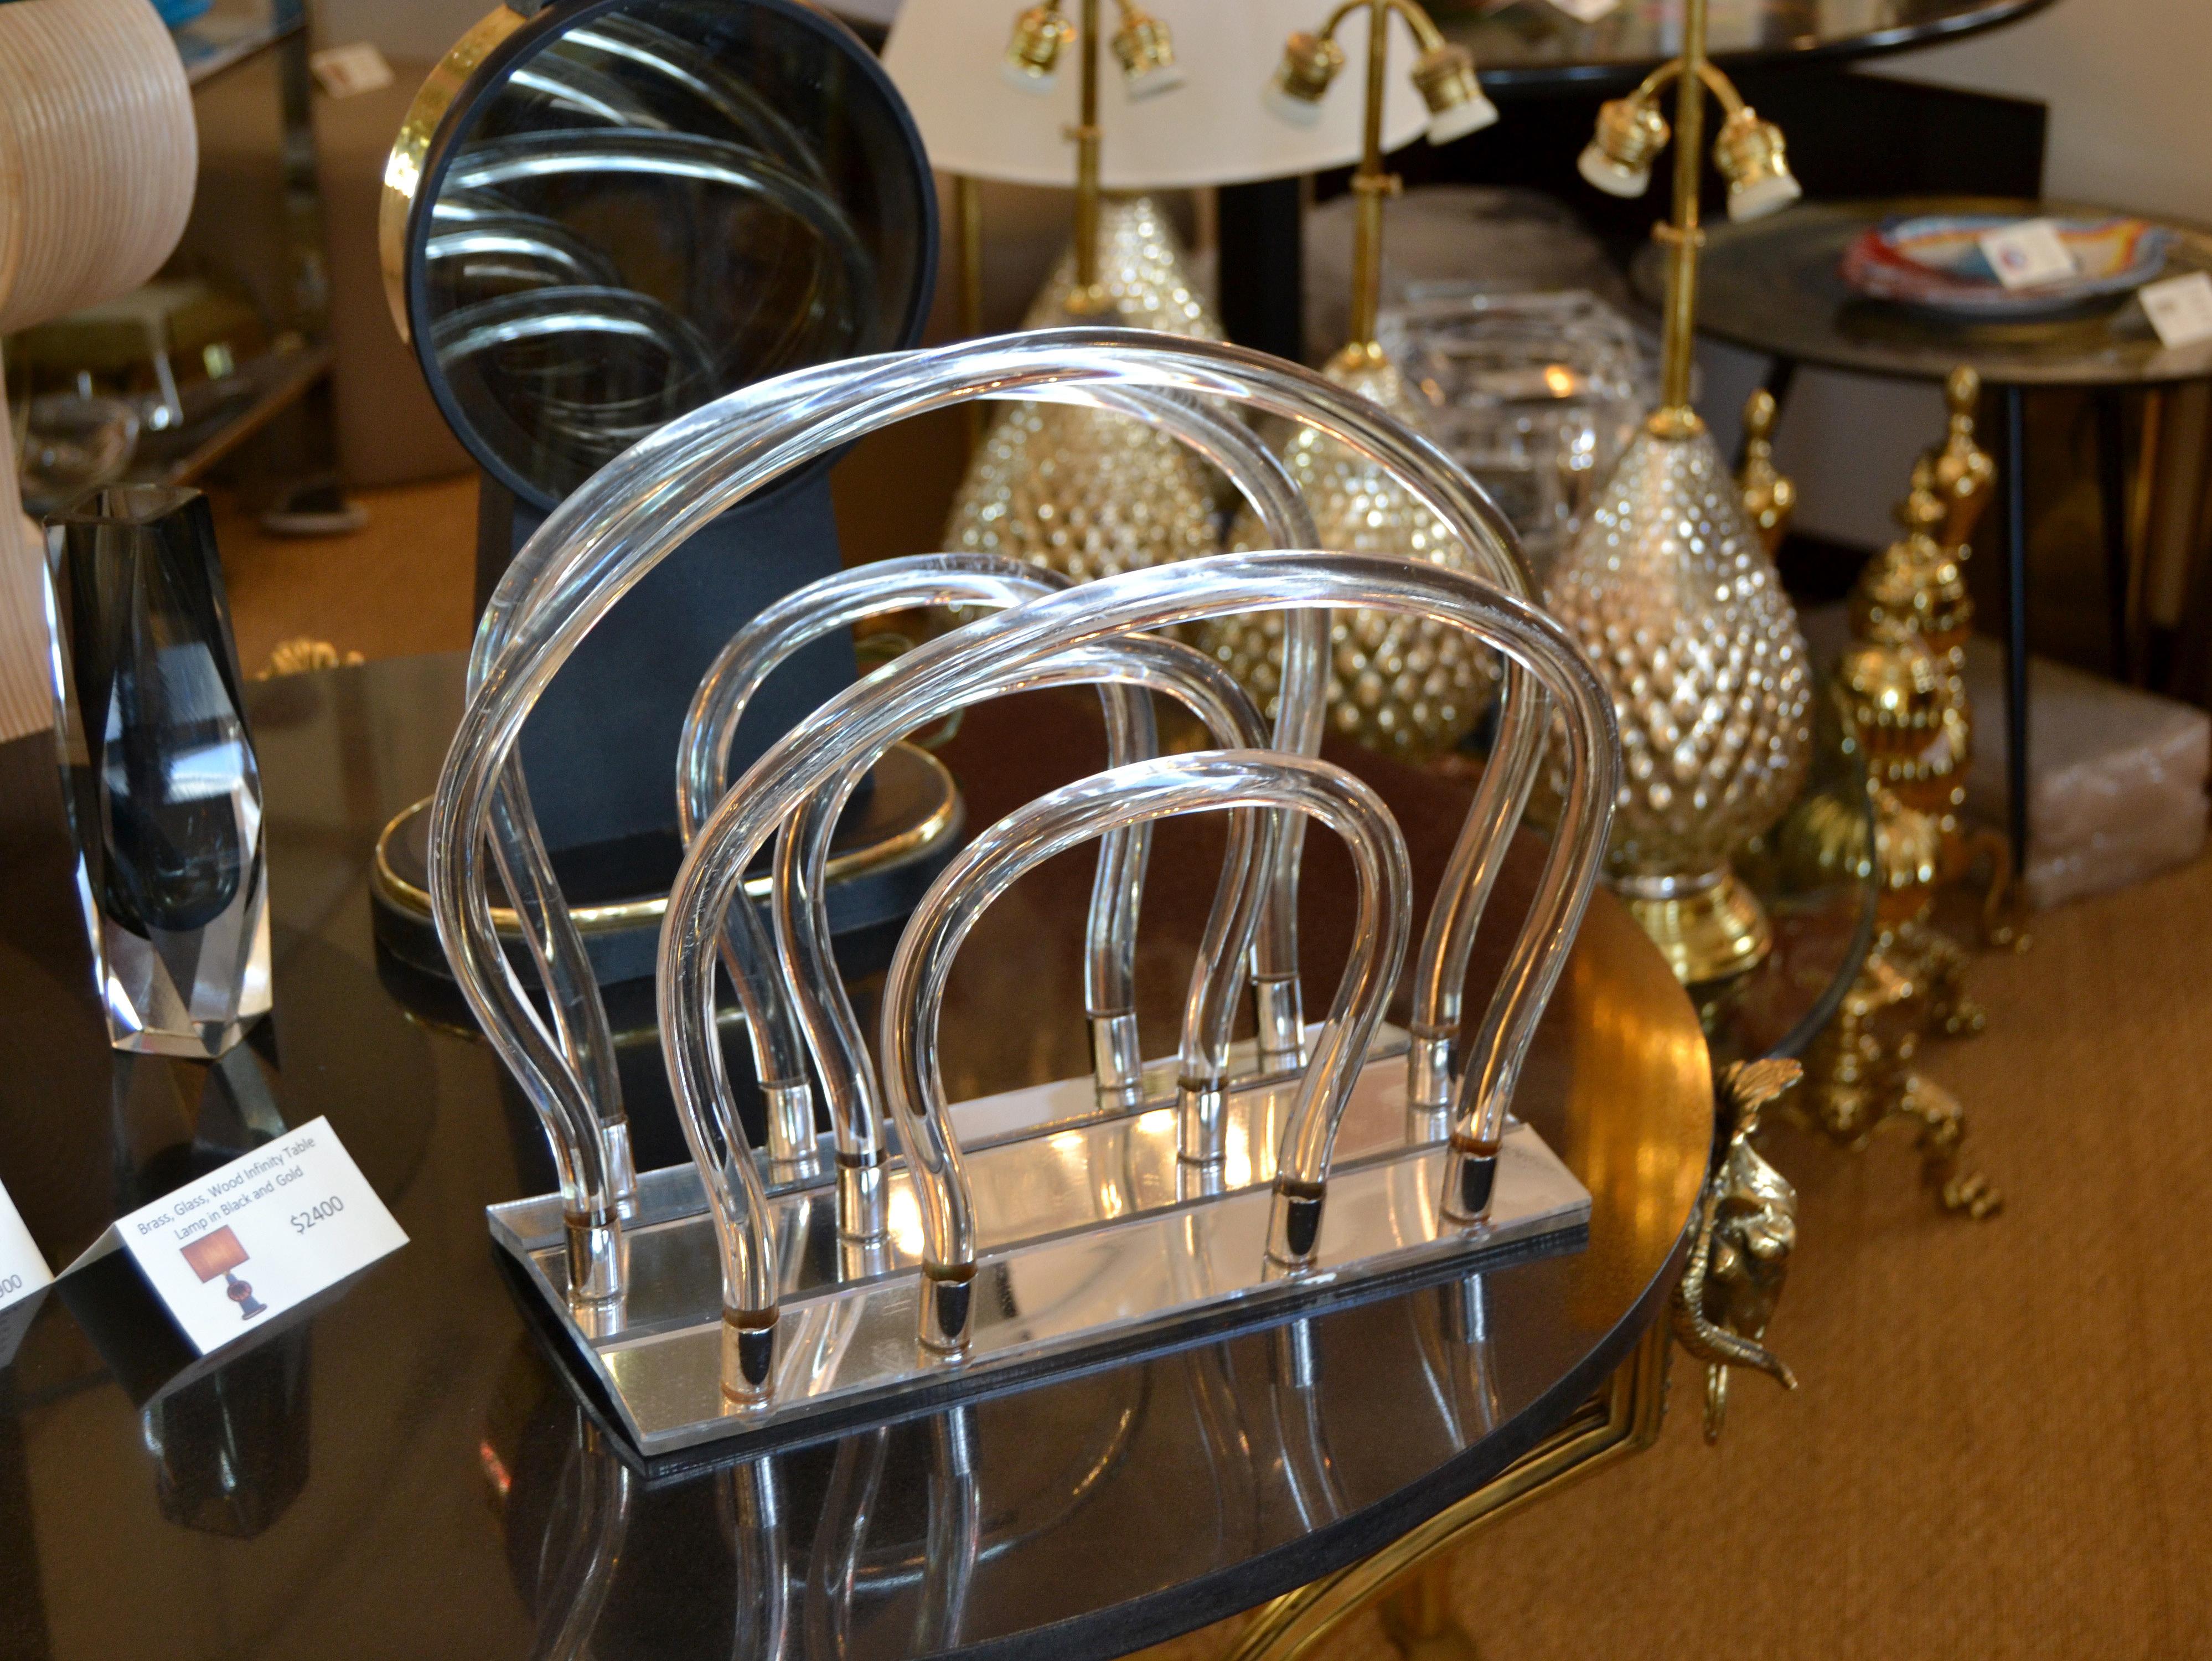 Dorothy Thorpe Mid-Century Modern mirrored glass magazine rack in Lucite and chrome.
Beautiful piece for any interior design to store your favorite magazines or books.